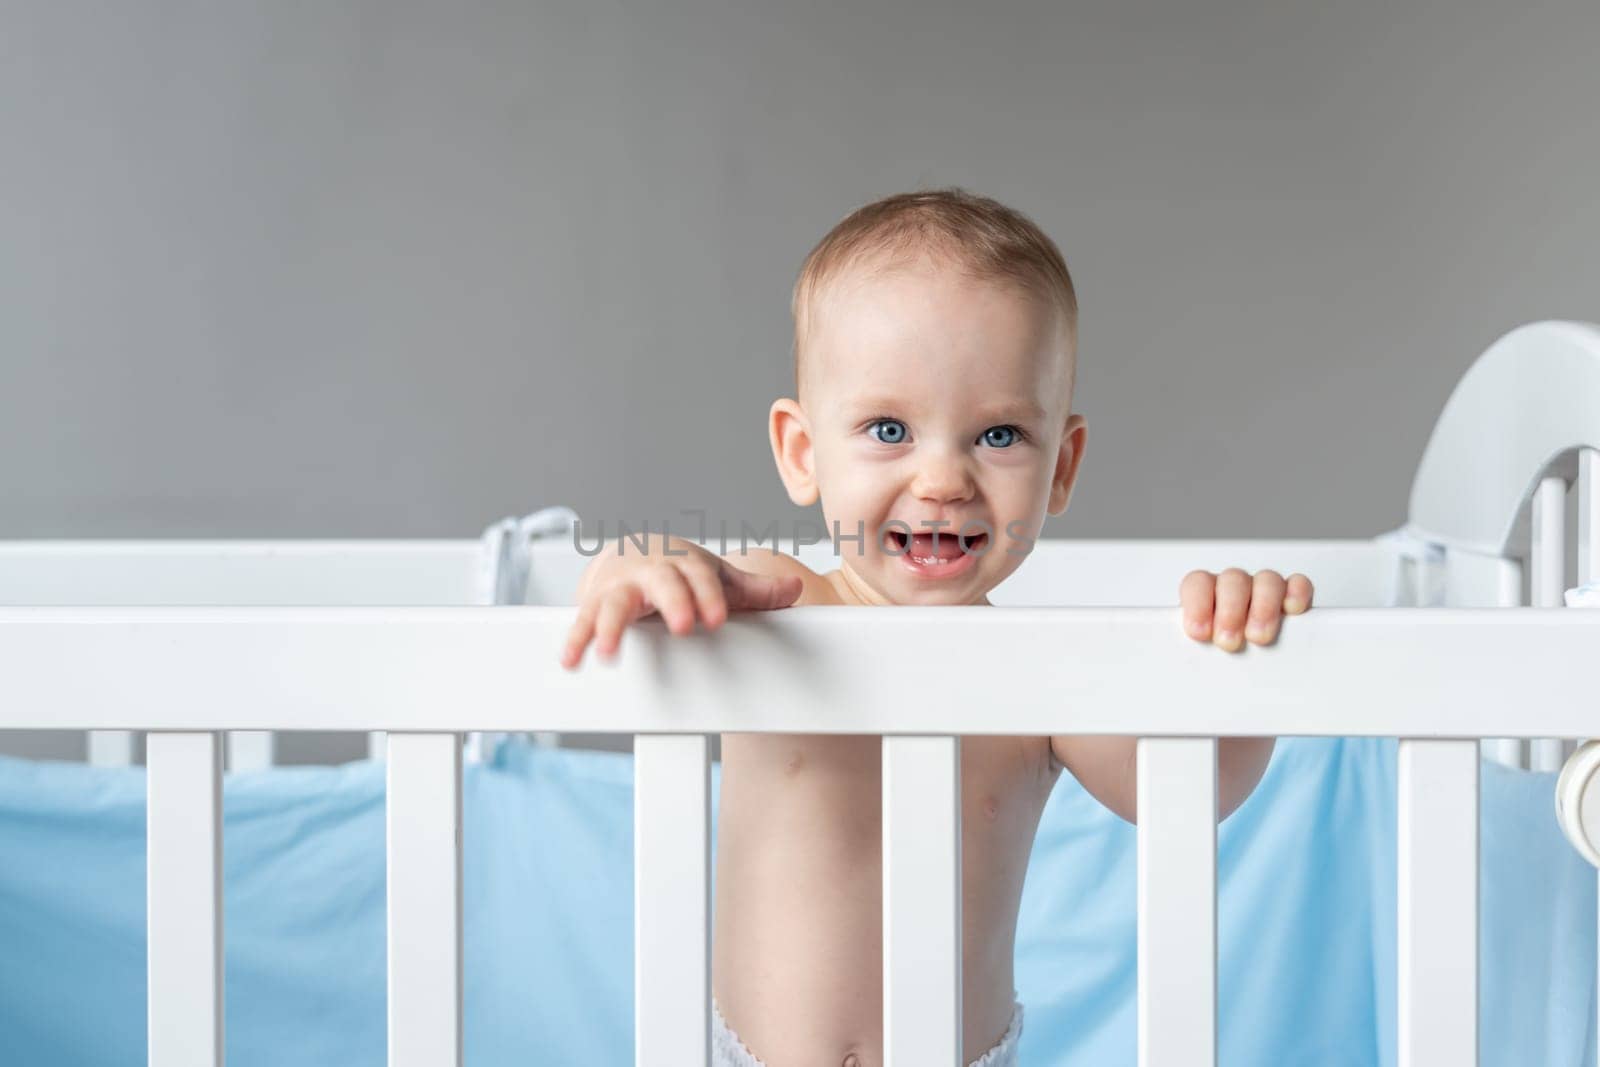 Laughing baby reaching out from his crib.